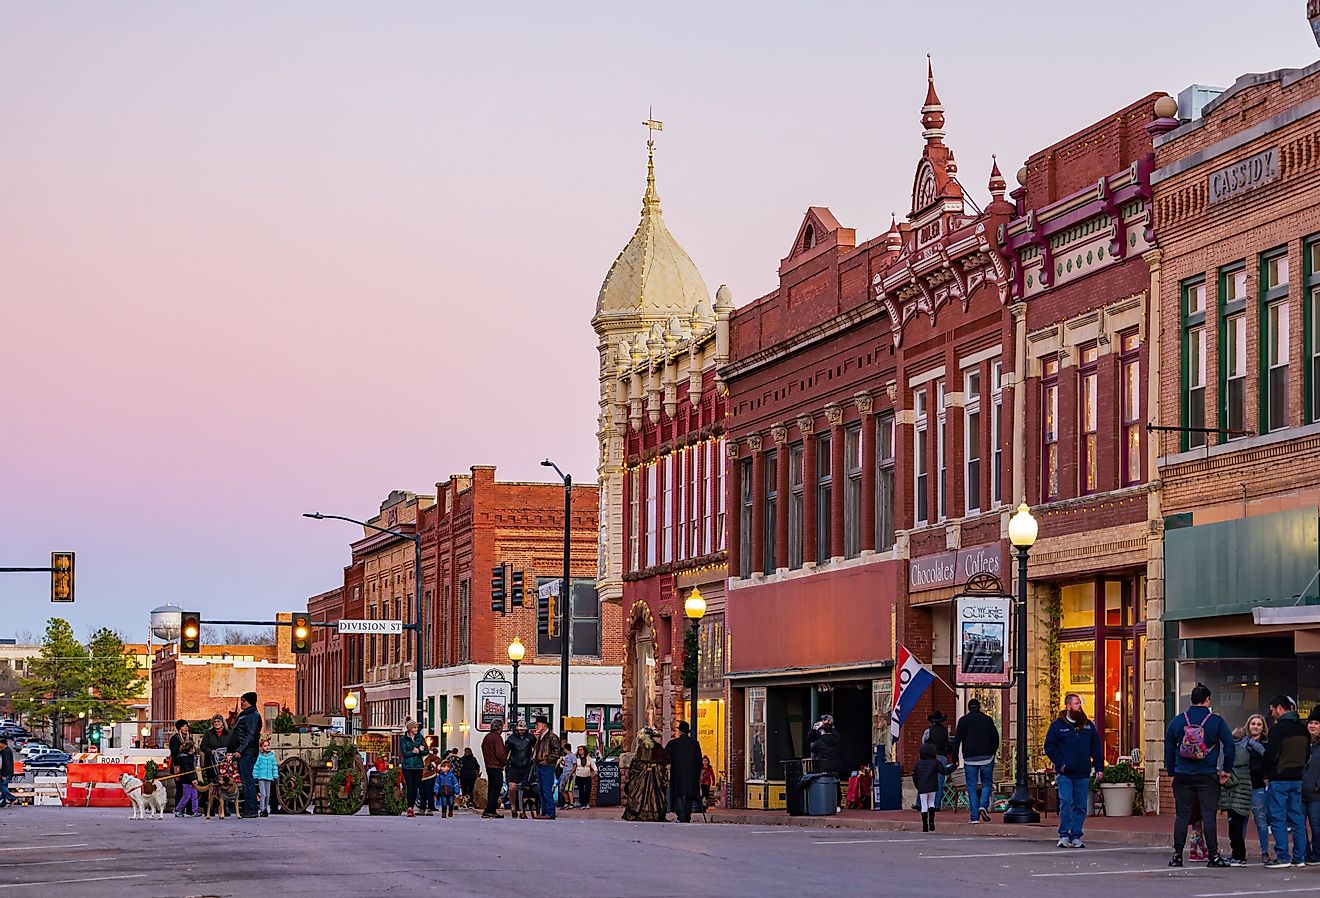 Night view of the historic district in Guthrie. Image credit Kit Leong via Shutterstock.